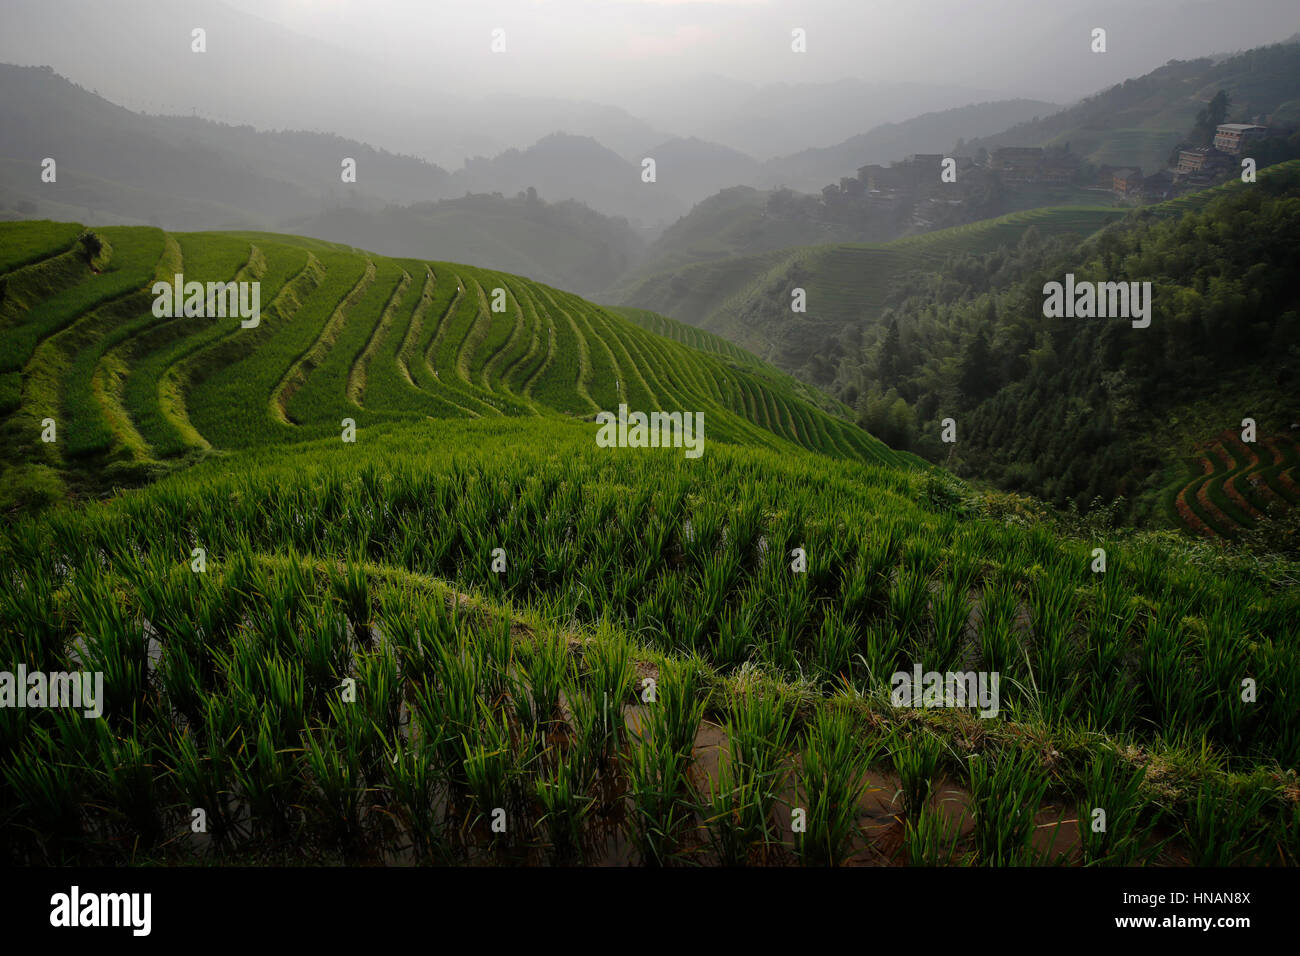 Paddy fields and rice plants i summer at the Longji rice terraces near Guilin, Guangxi Province China Stock Photo